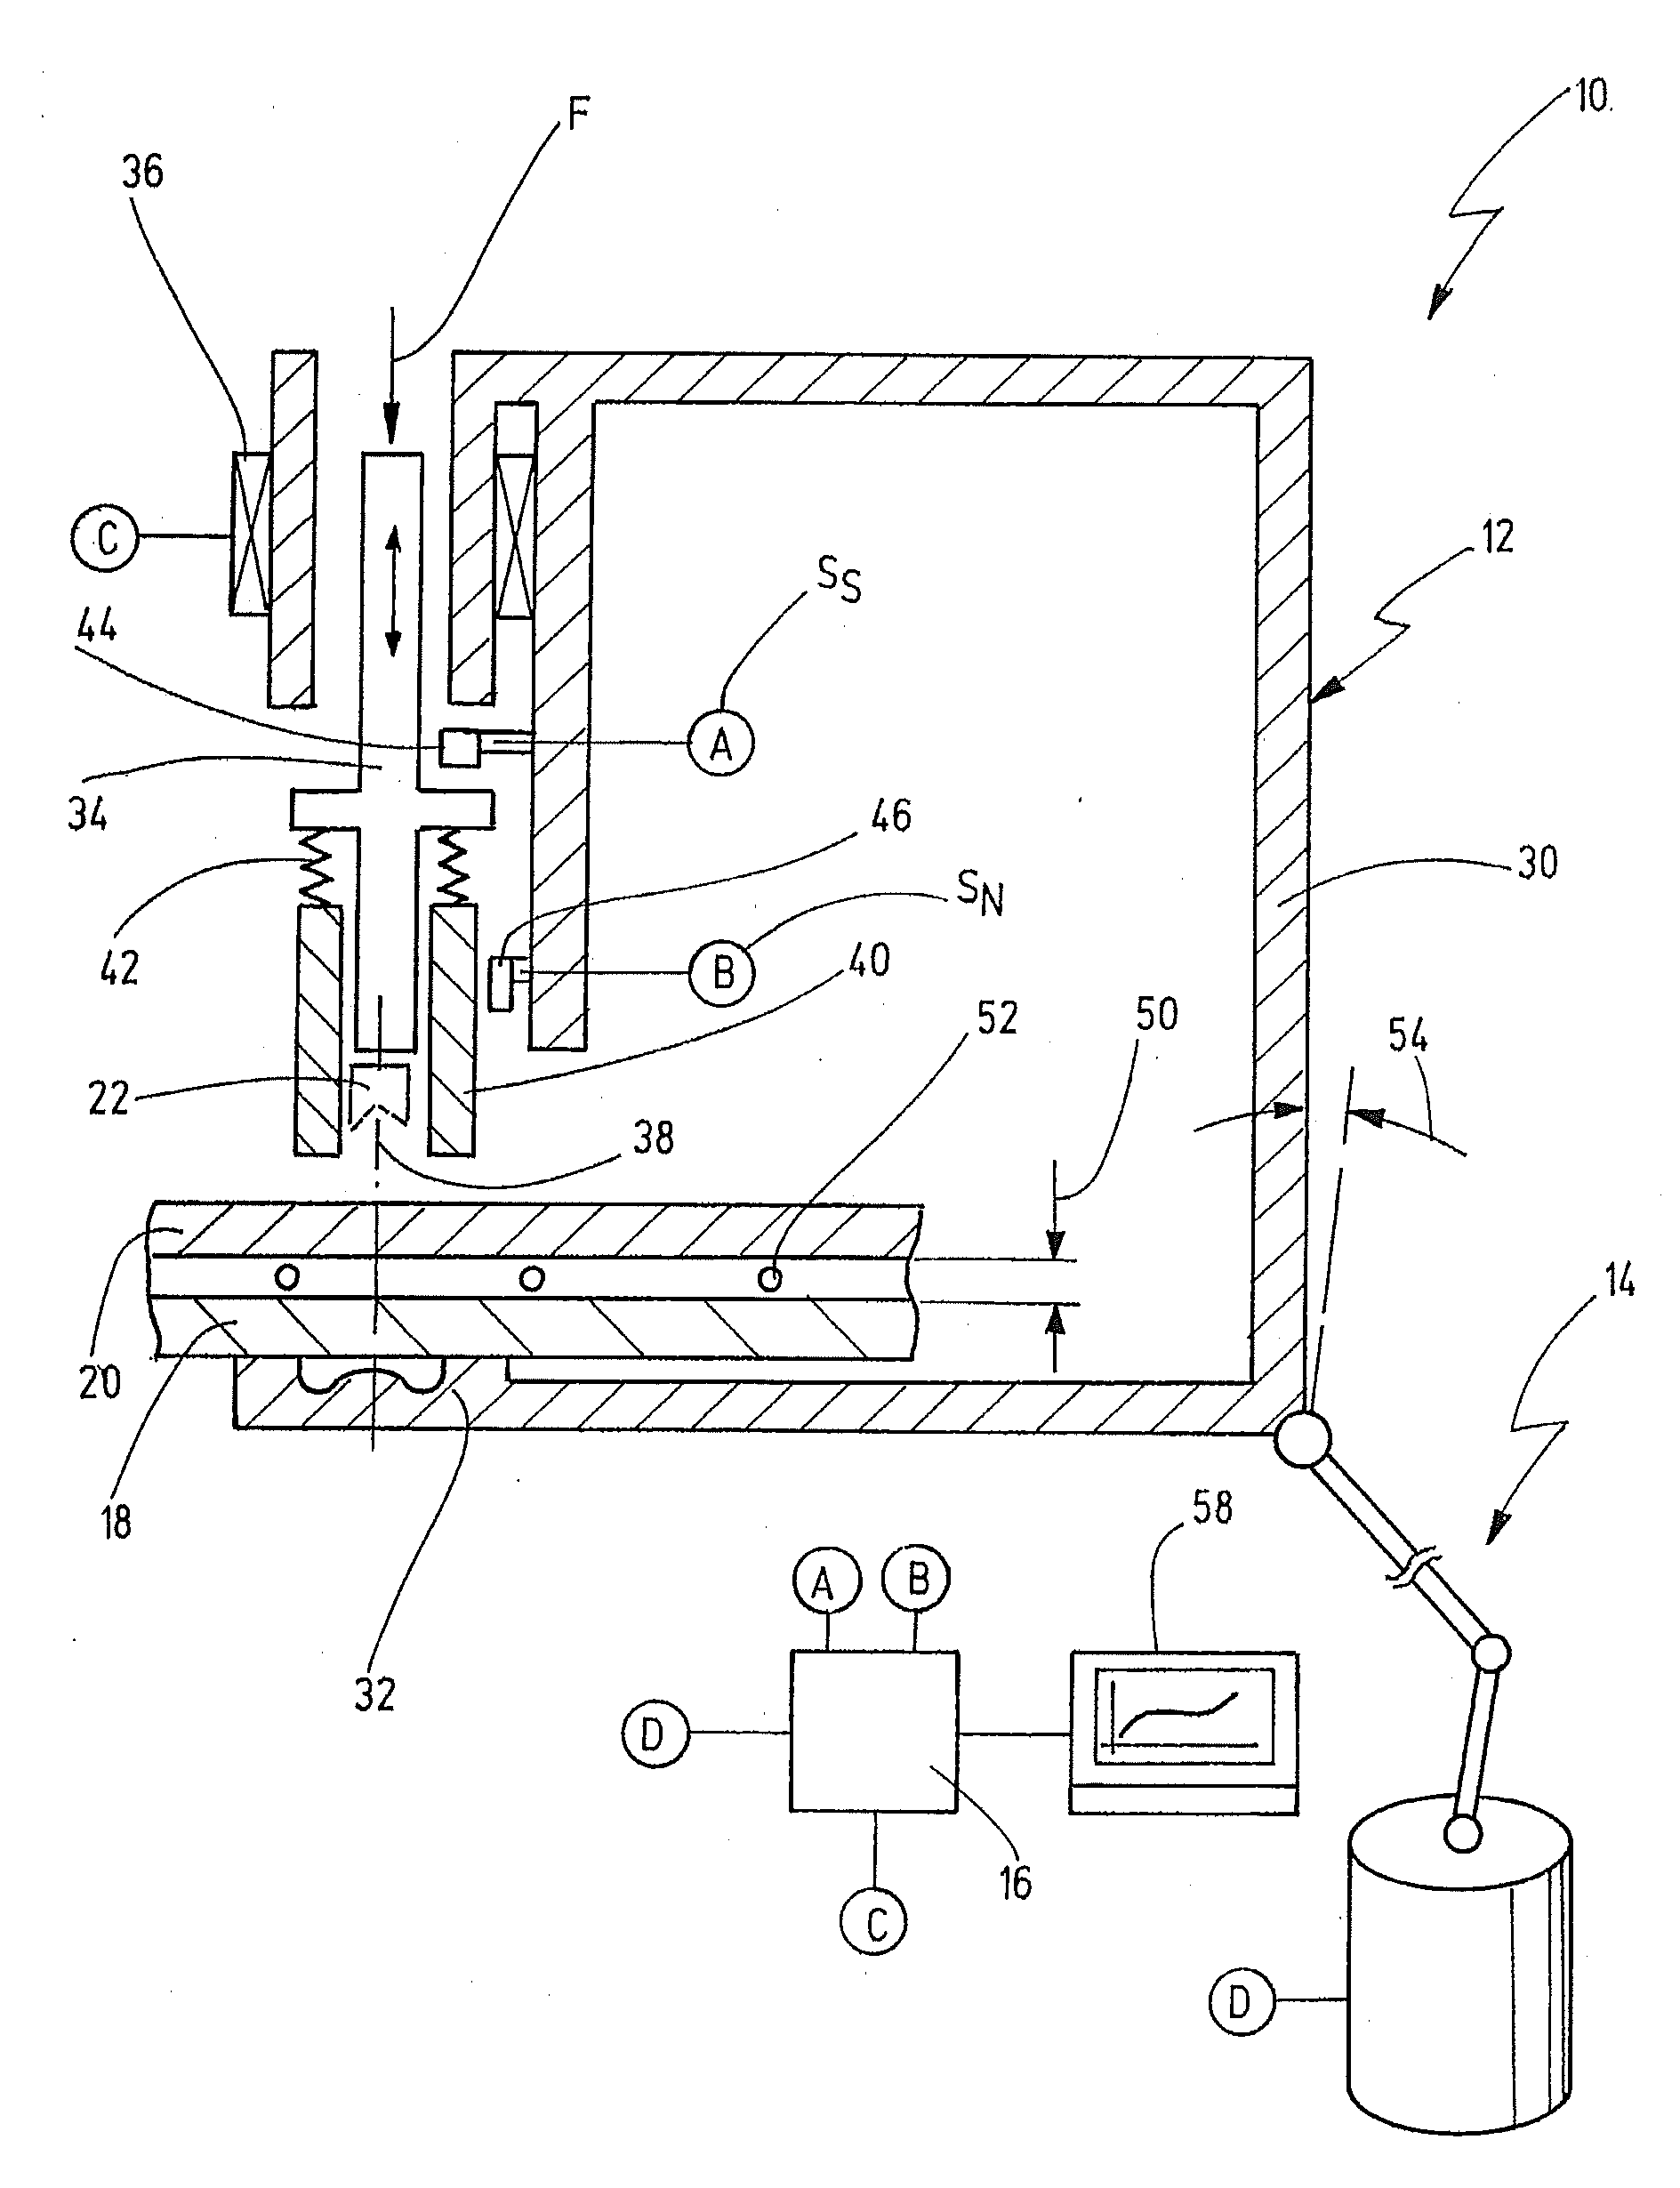 Method for monitoring a joining process